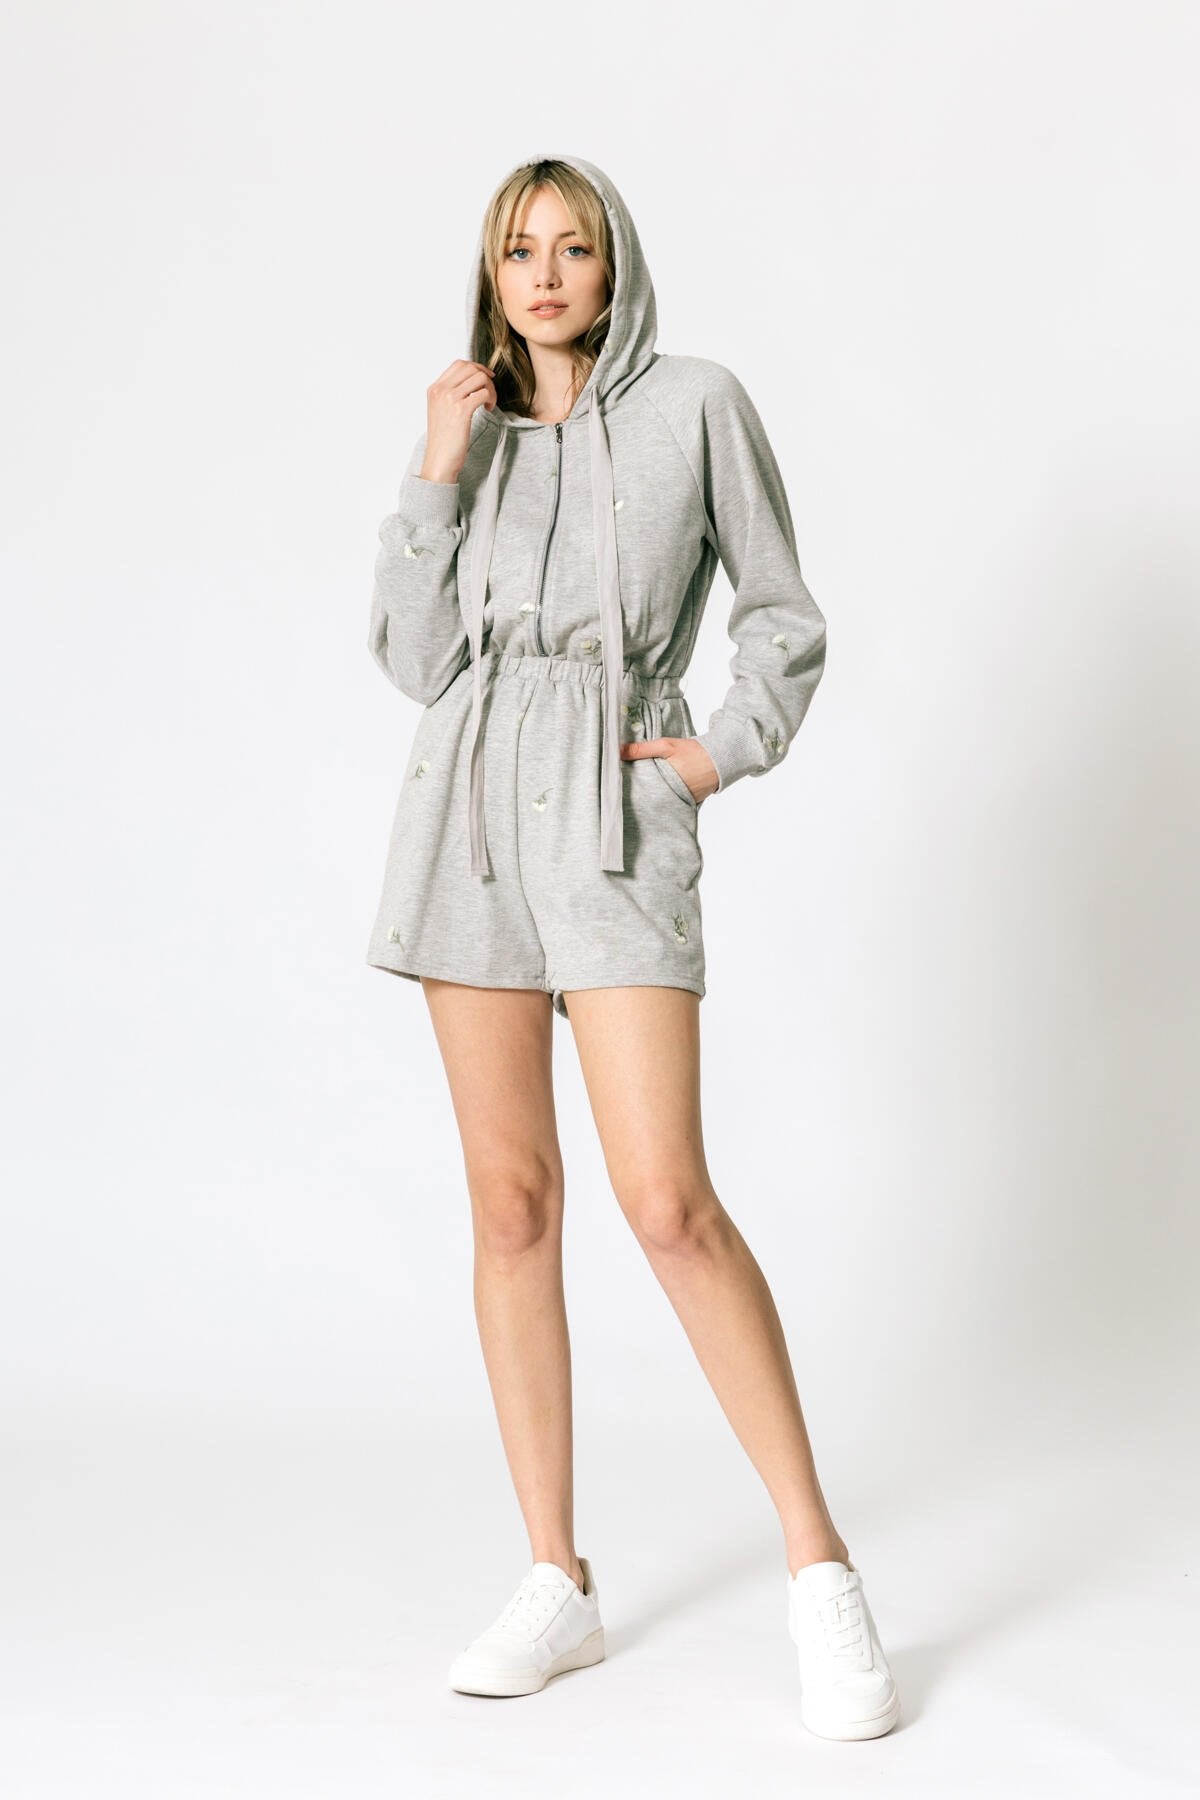 a model wearing a grey terry hooded romper against a white wall. 